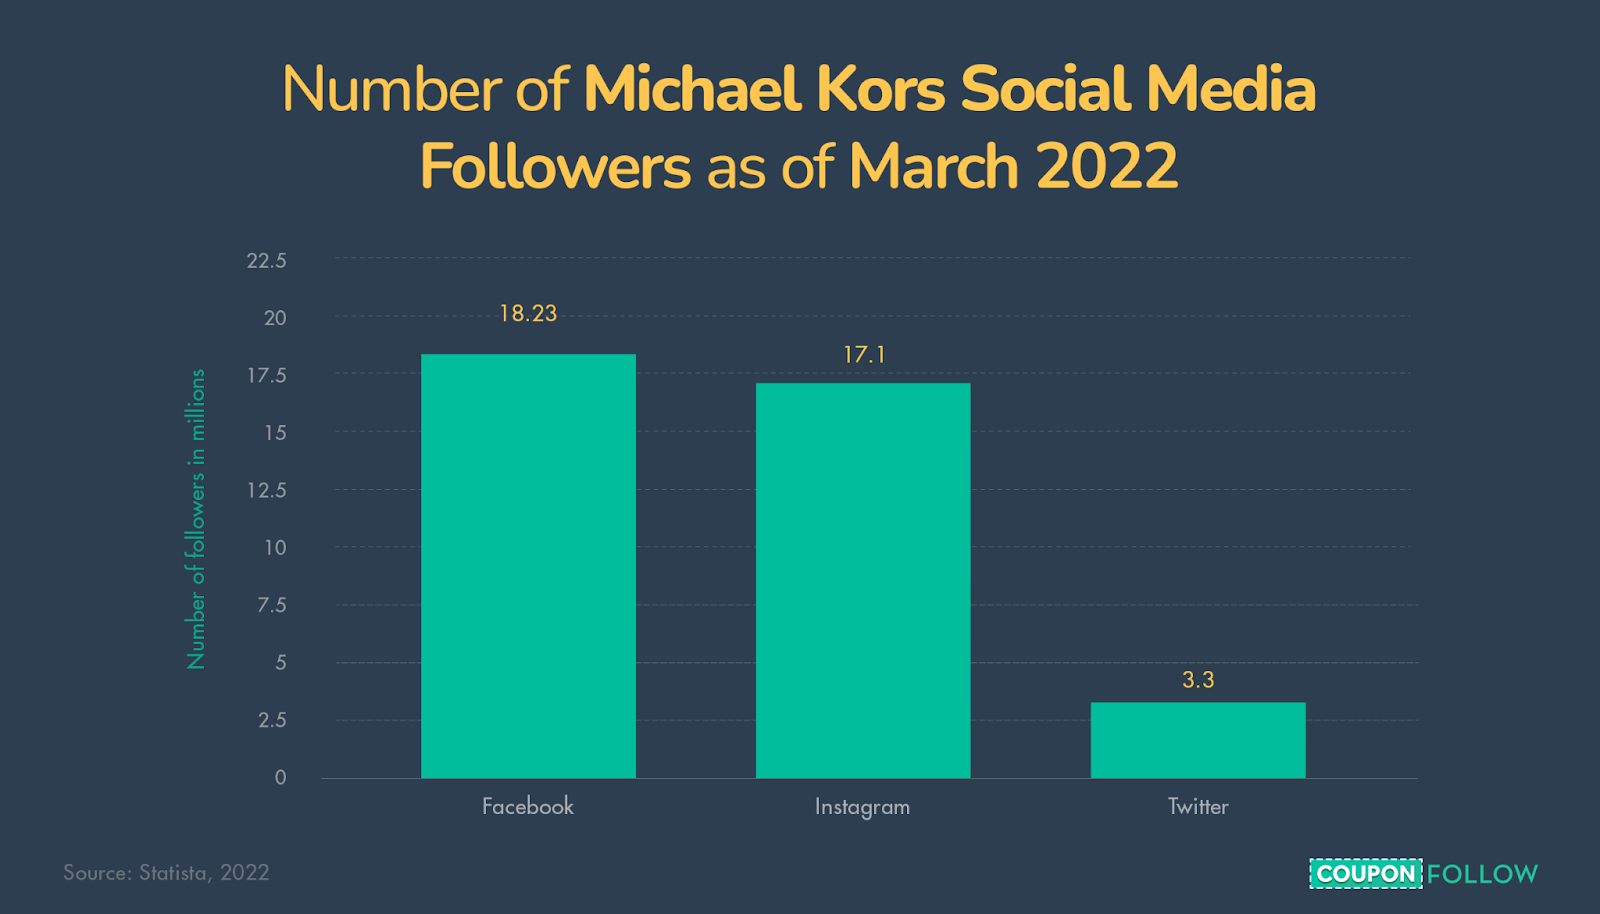 graph showing the number of Michael Kors followers across social media platforms